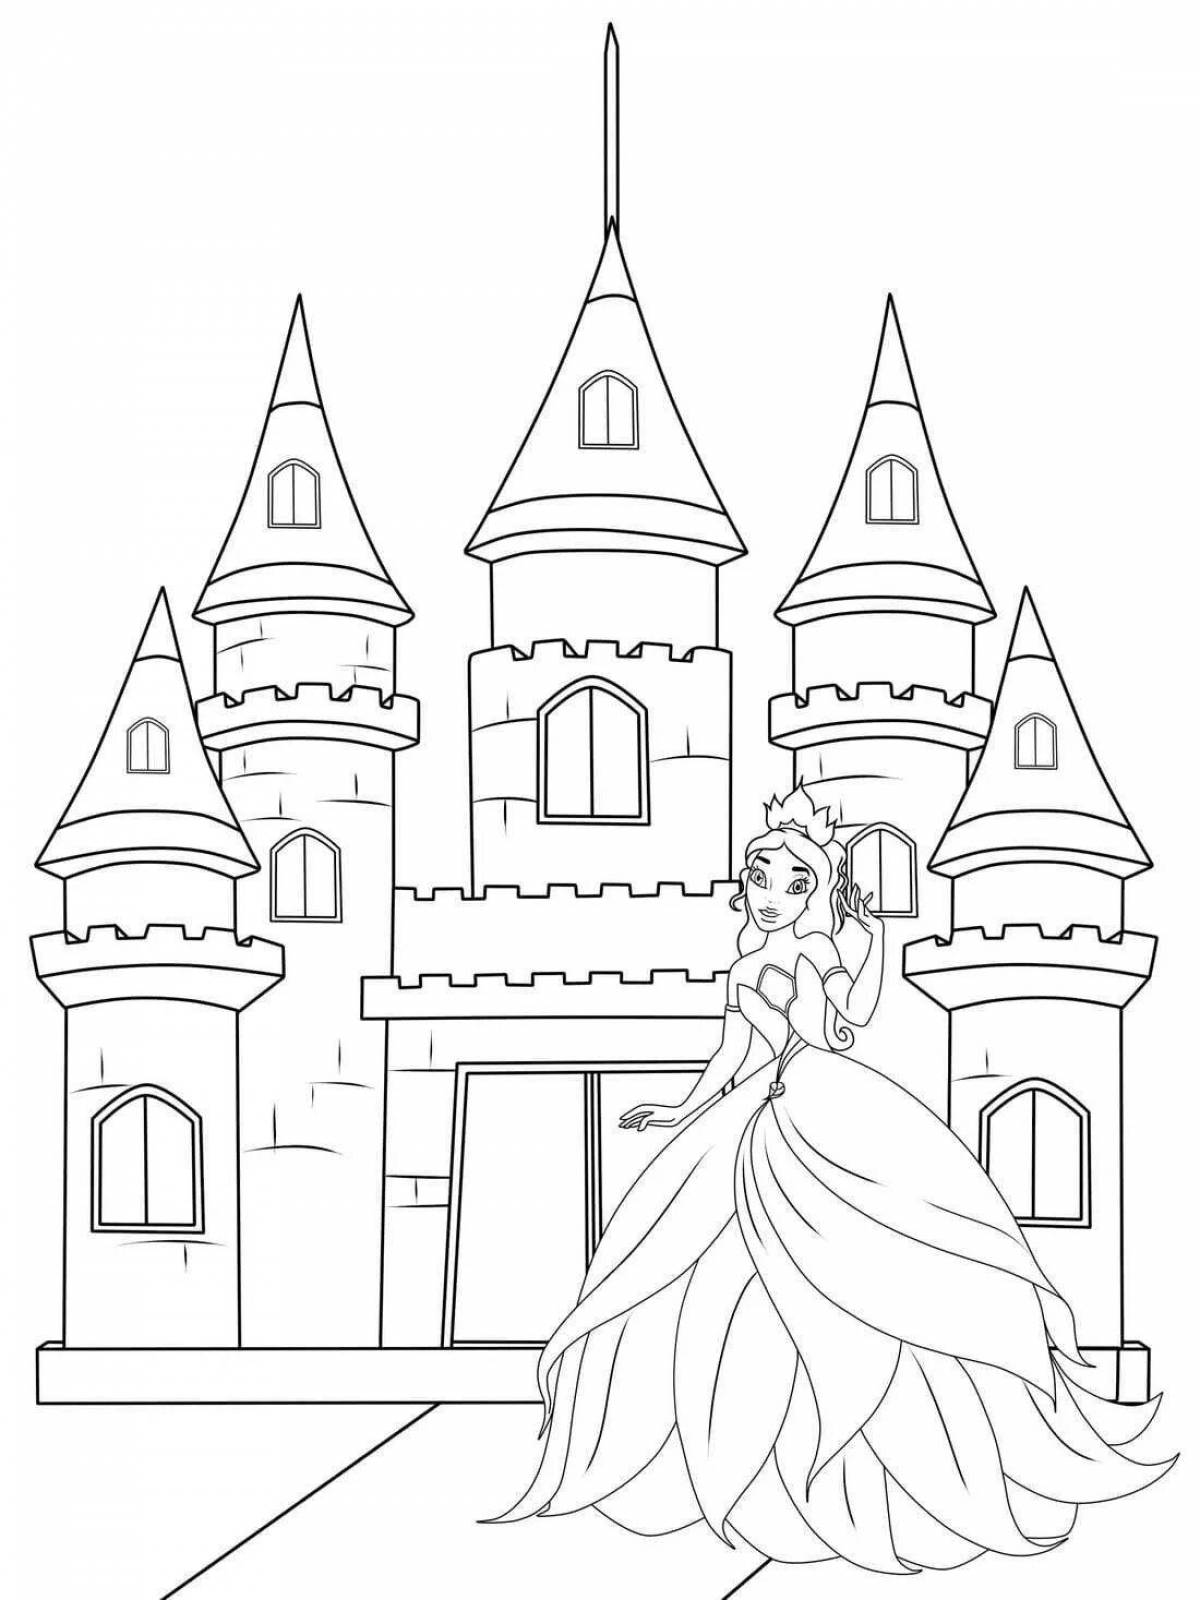 Colouring funny castles for girls